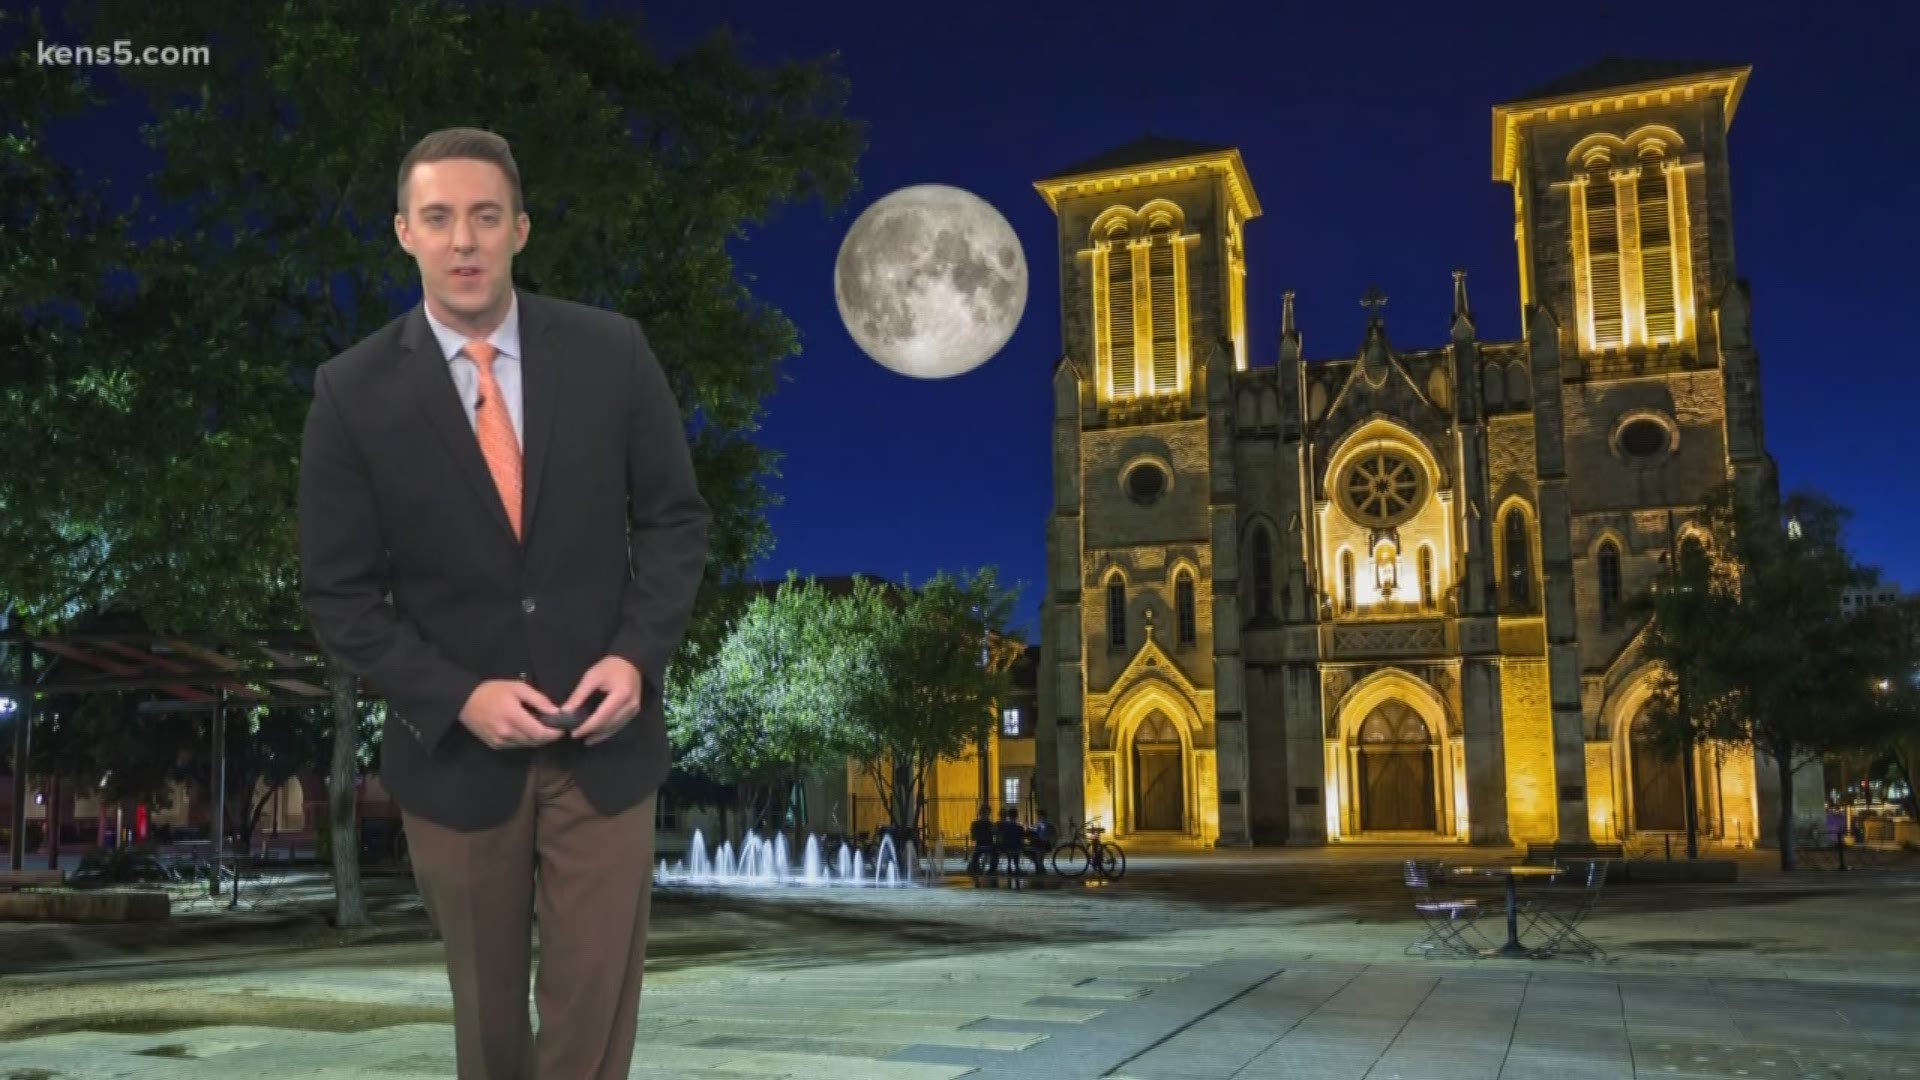 A full moon on Friday the 13th happens about every 20 years. What's the deal with a harvest moon, though?